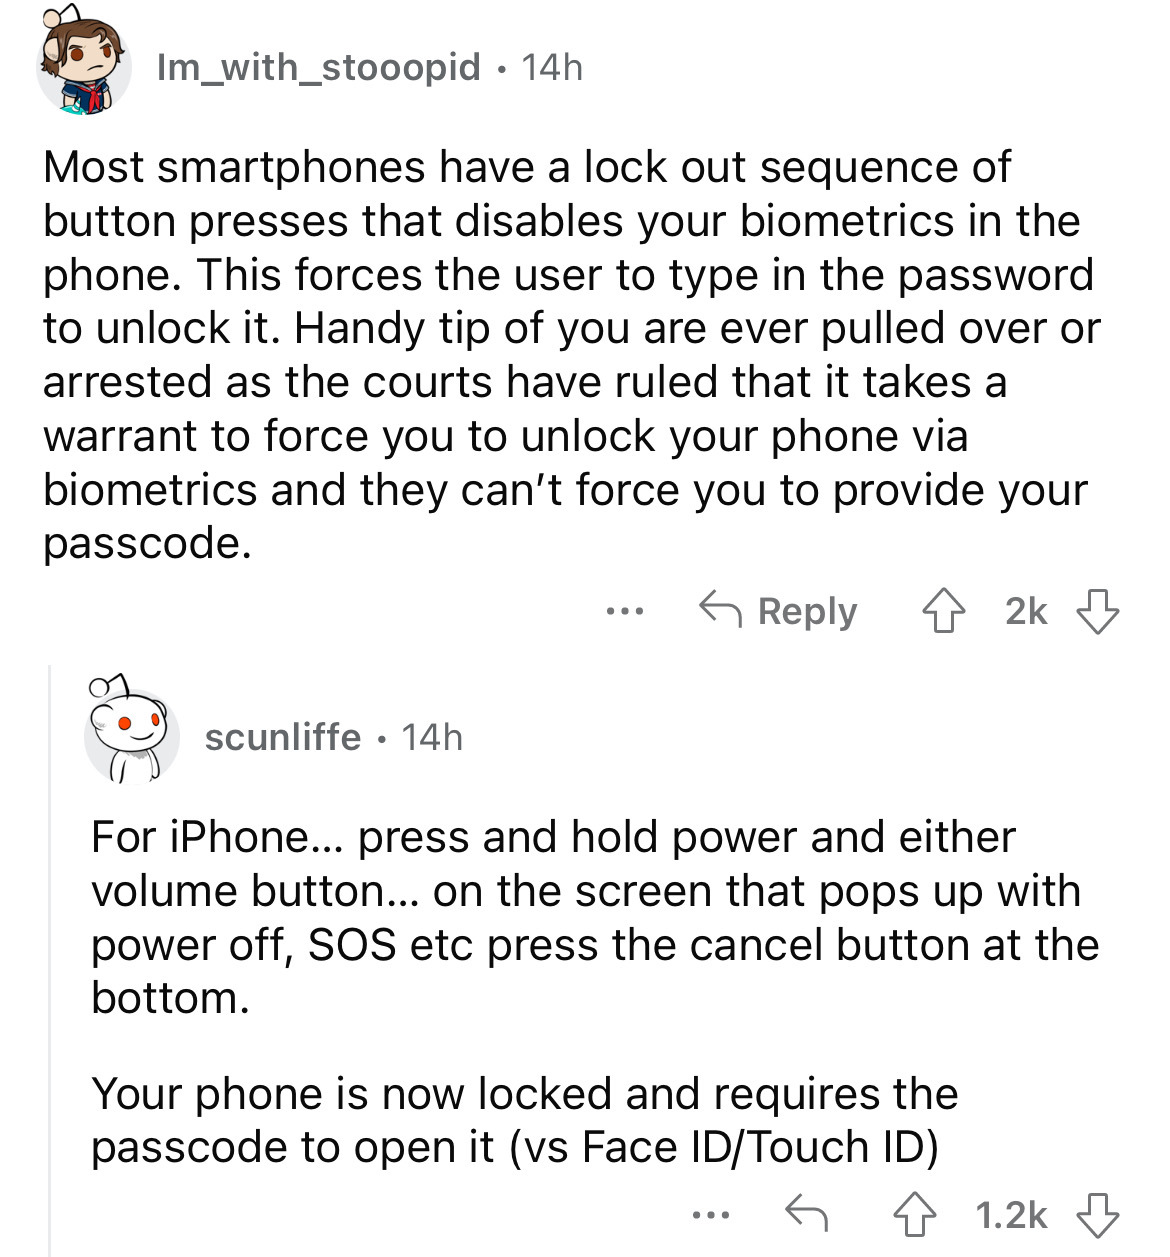 angle - Im_with_stooopid. 14h Most smartphones have a lock out sequence of button presses that disables your biometrics in the phone. This forces the user to type in the password to unlock it. Handy tip of you are ever pulled over or arrested as the court